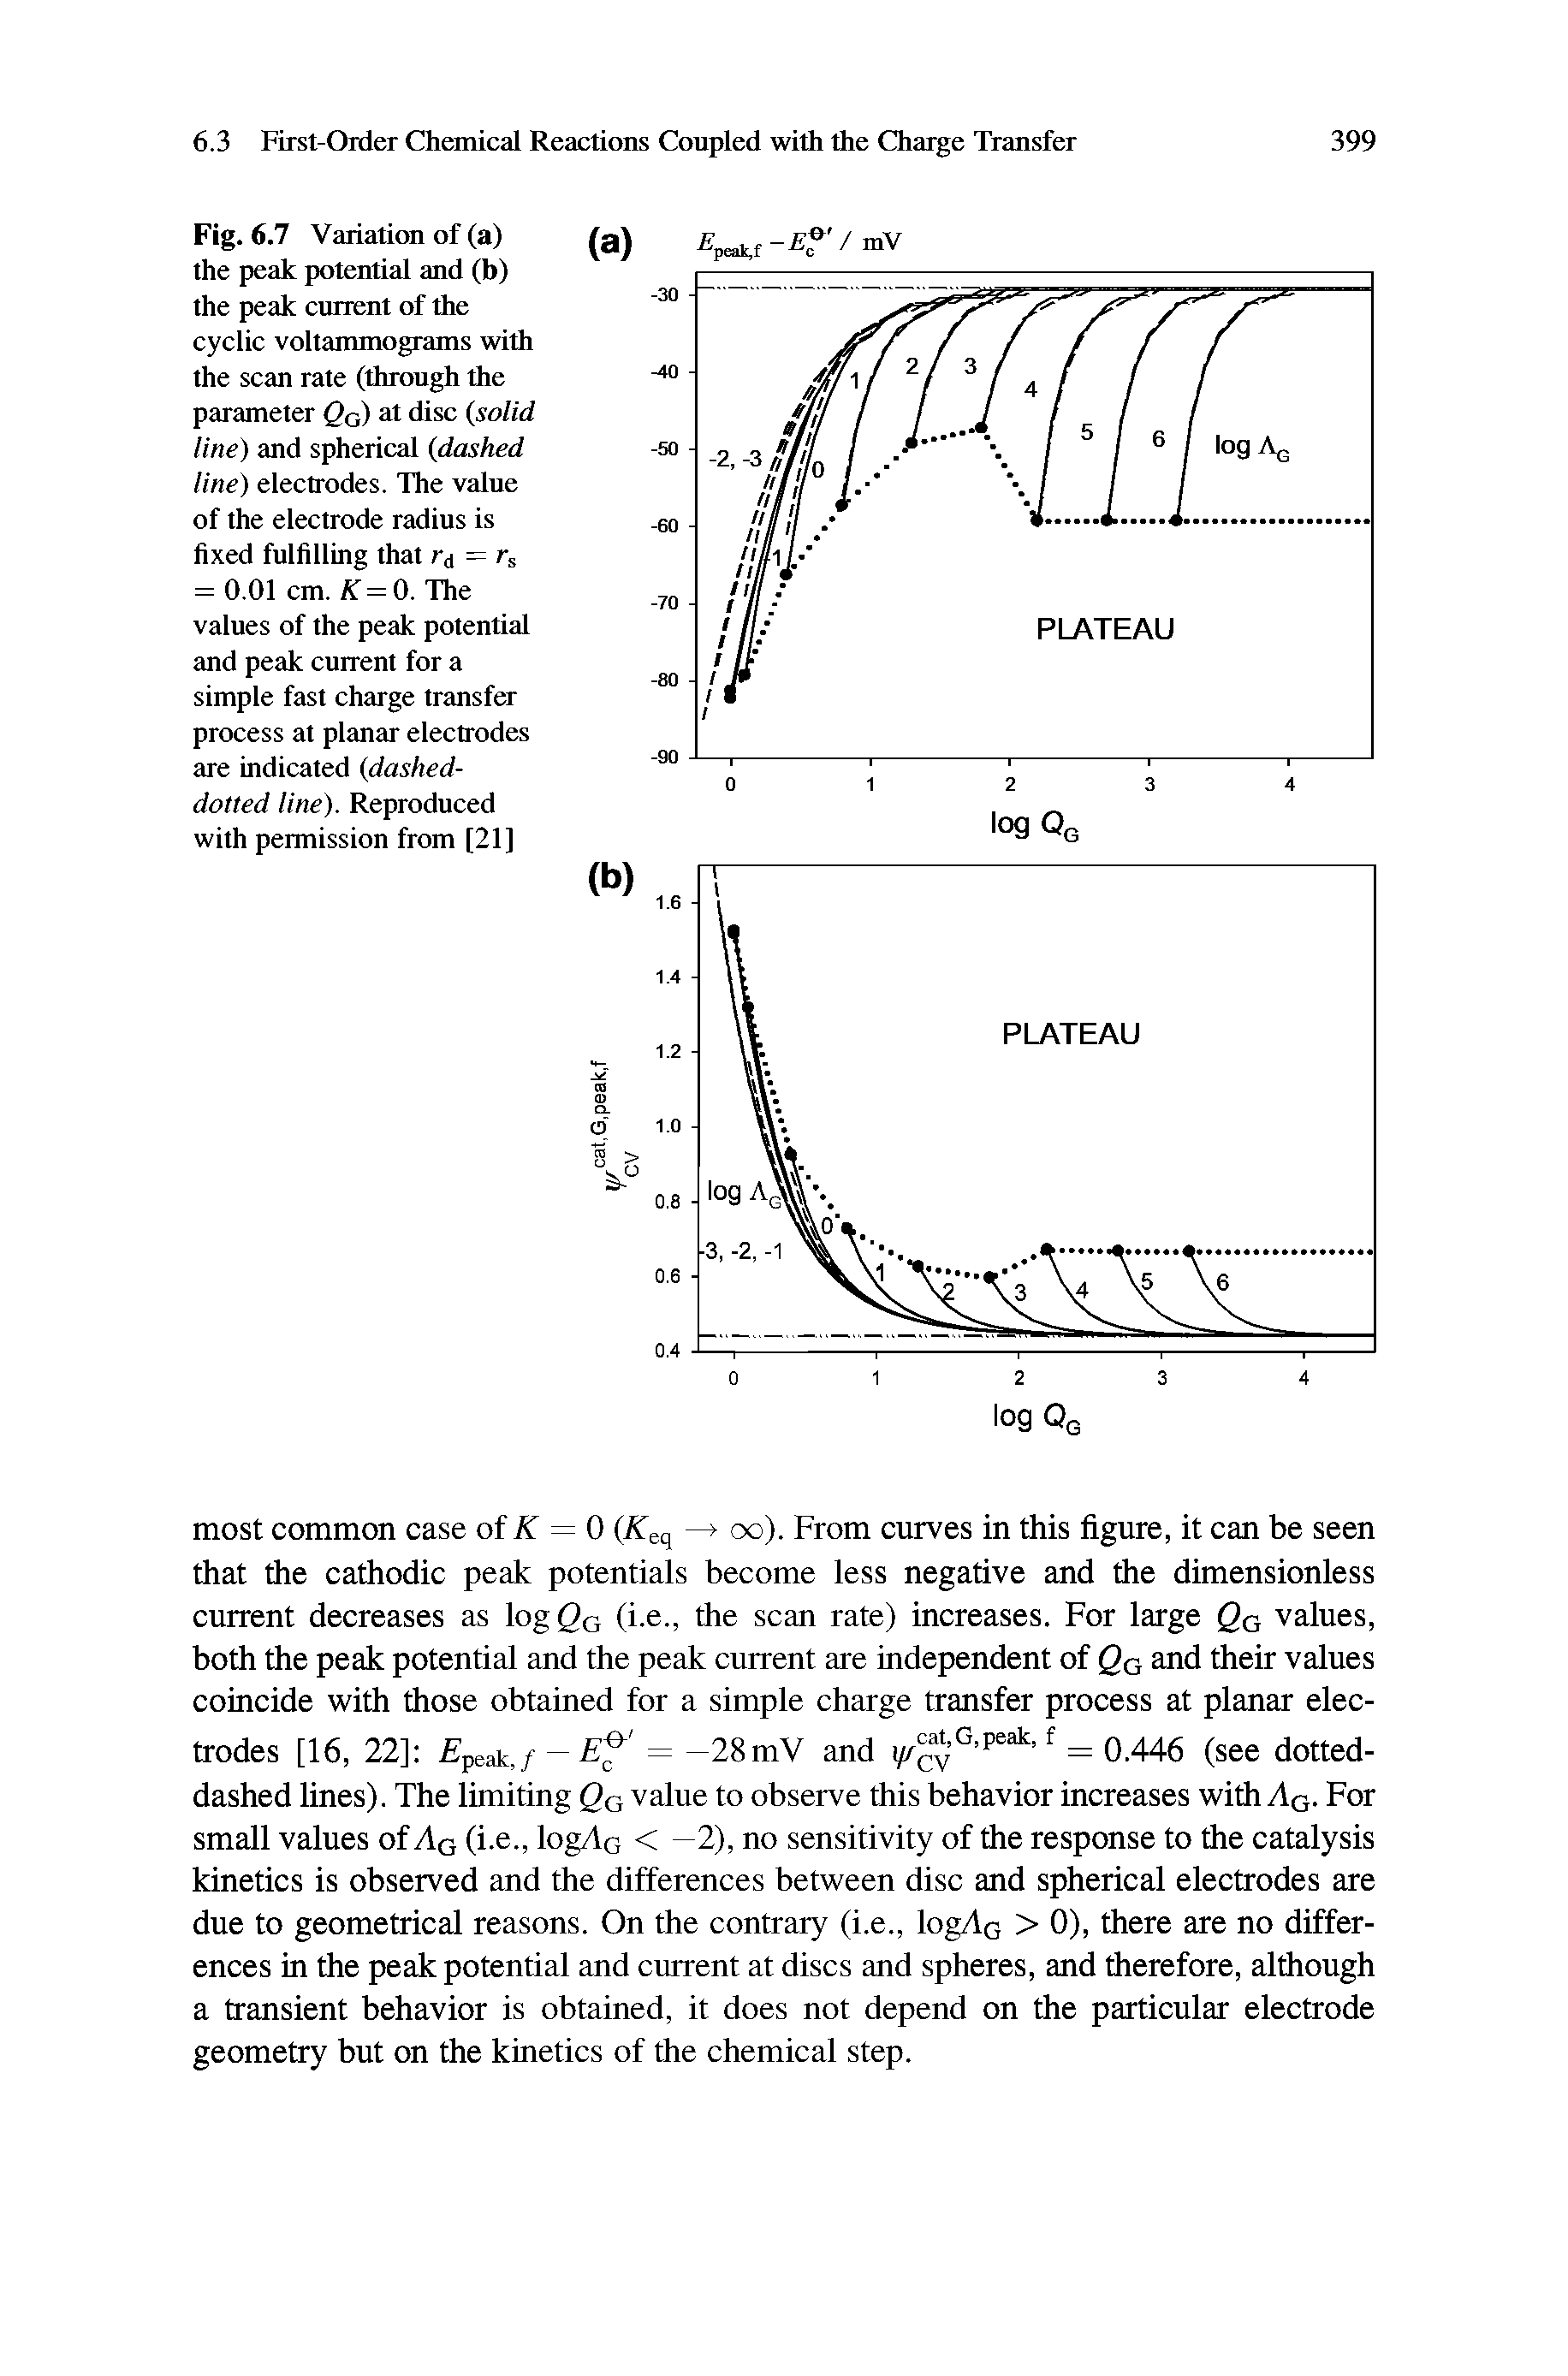 Fig. 6.7 Variation of (a) the peak potential and (b) the peak current of the cyclic voltarrunograms with the scan rate (through the parameter Qa) at disc (solid line) and spherical (dashed line) electrodes. The value of the electrode radius is fixed fulfilling that r = rs = 0.01 cm. K = 0. The values of the peak potential and peak current for a simple fast charge transfer process at planar electrodes are indicated (dashed-dotted line). Reproduced with permission from [21]...